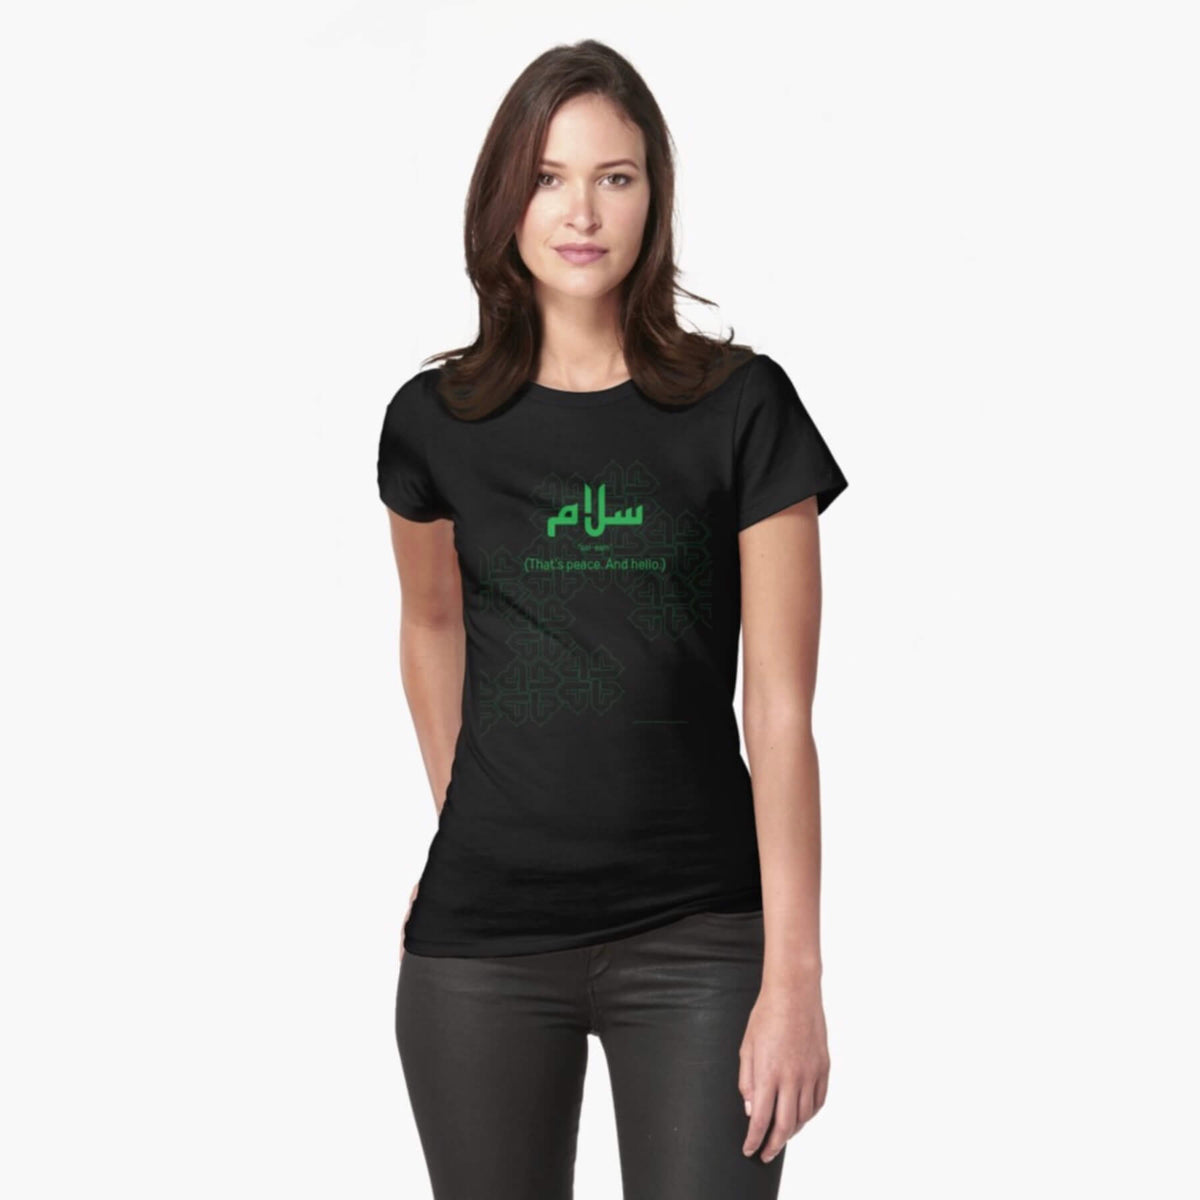 A white female model with hazel eyes and brown shoulder-length hair wears the Haluna Happy Names exclusive &#39;Salaam—Arabic Key Words&#39; design black fitted t-shirt and a pair of tight black jeans. The word &#39;salaam&#39; is written in green in Arabic with a kufic-style font, and beneath it in English the words &quot;Sal-aam&quot; and beneath that the words &#39;(That means peace. And hello)&#39;. The text is positioned on the tshirt so it falls across the chest of the model against a complementary green patterned background print. 